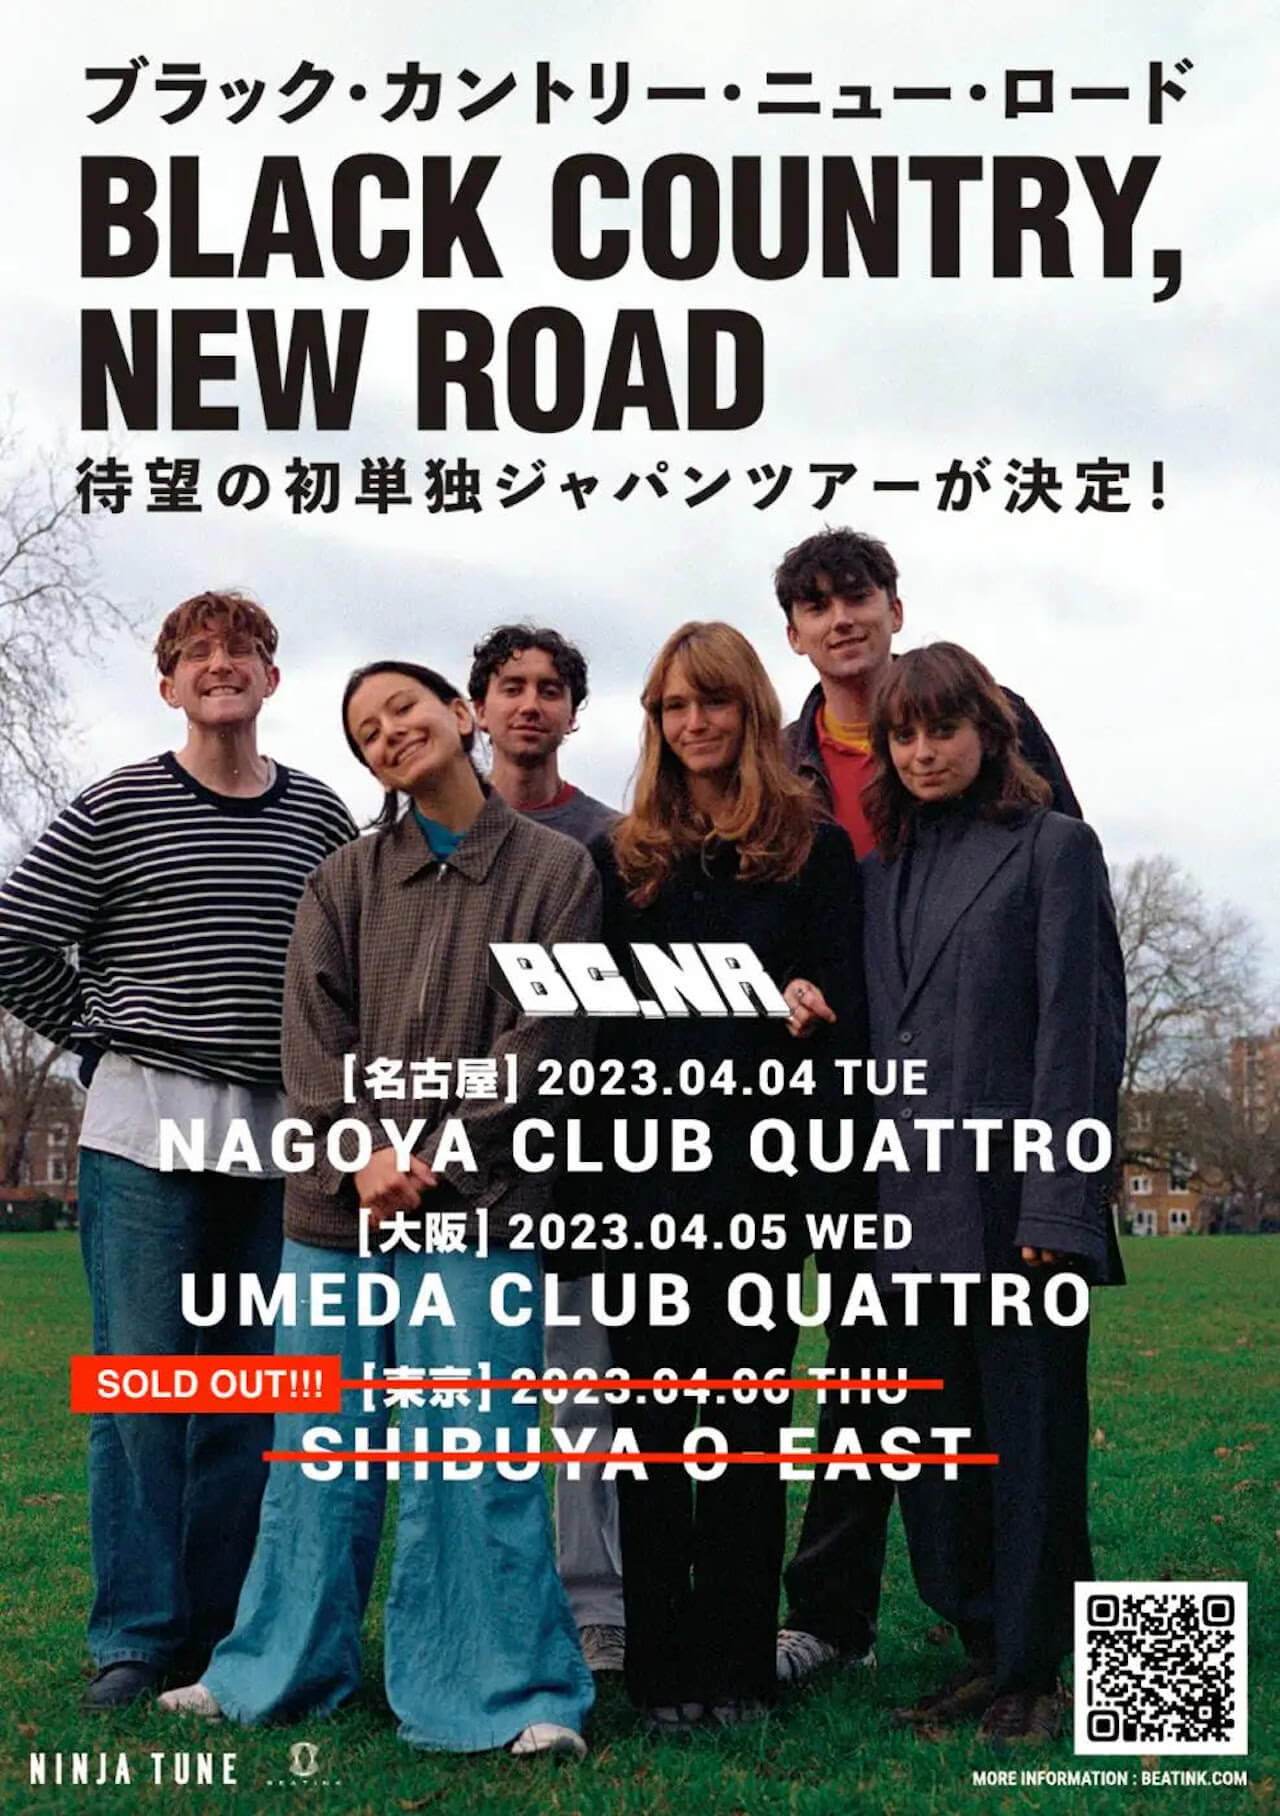 Black Country, New Road──2023年4月3日、彼らの「今」を訊く interview230404-blackcountrynewroad-2